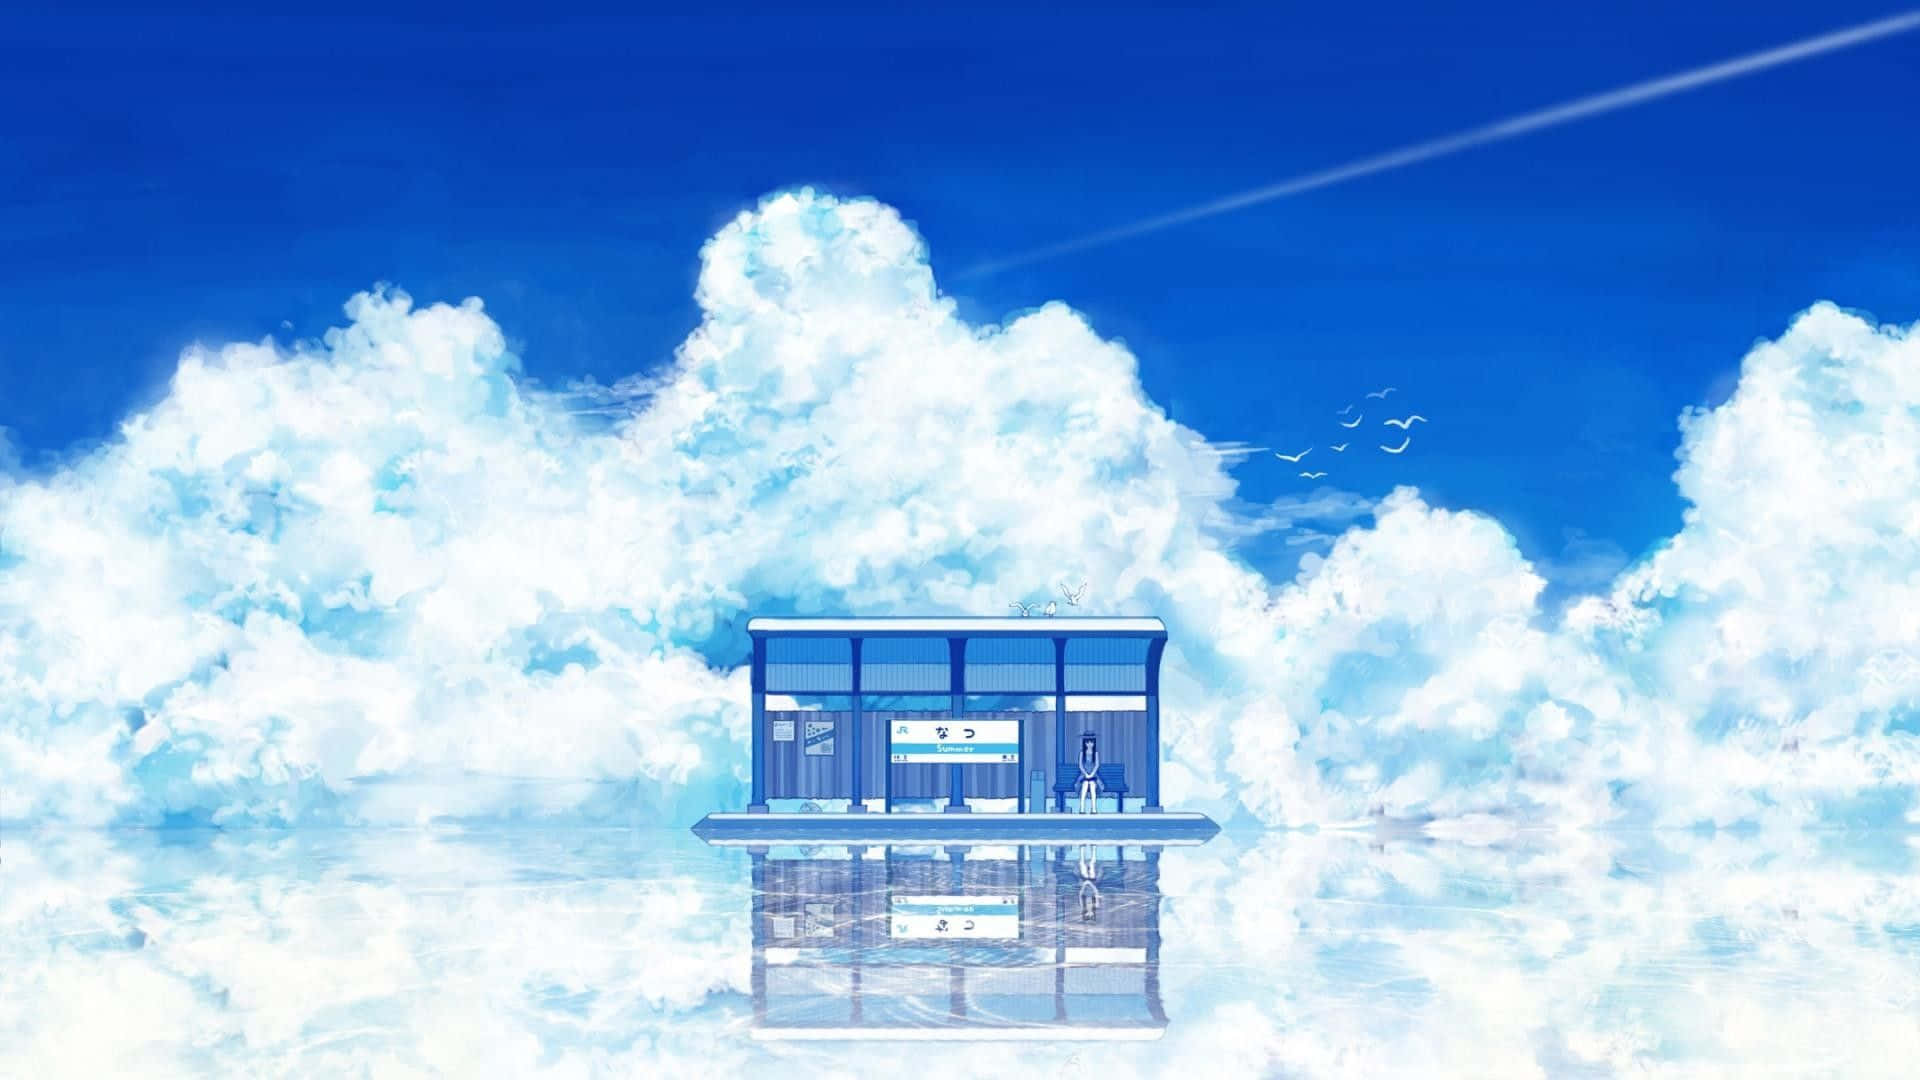 Blue Anime Background Store Floating In The Clouds